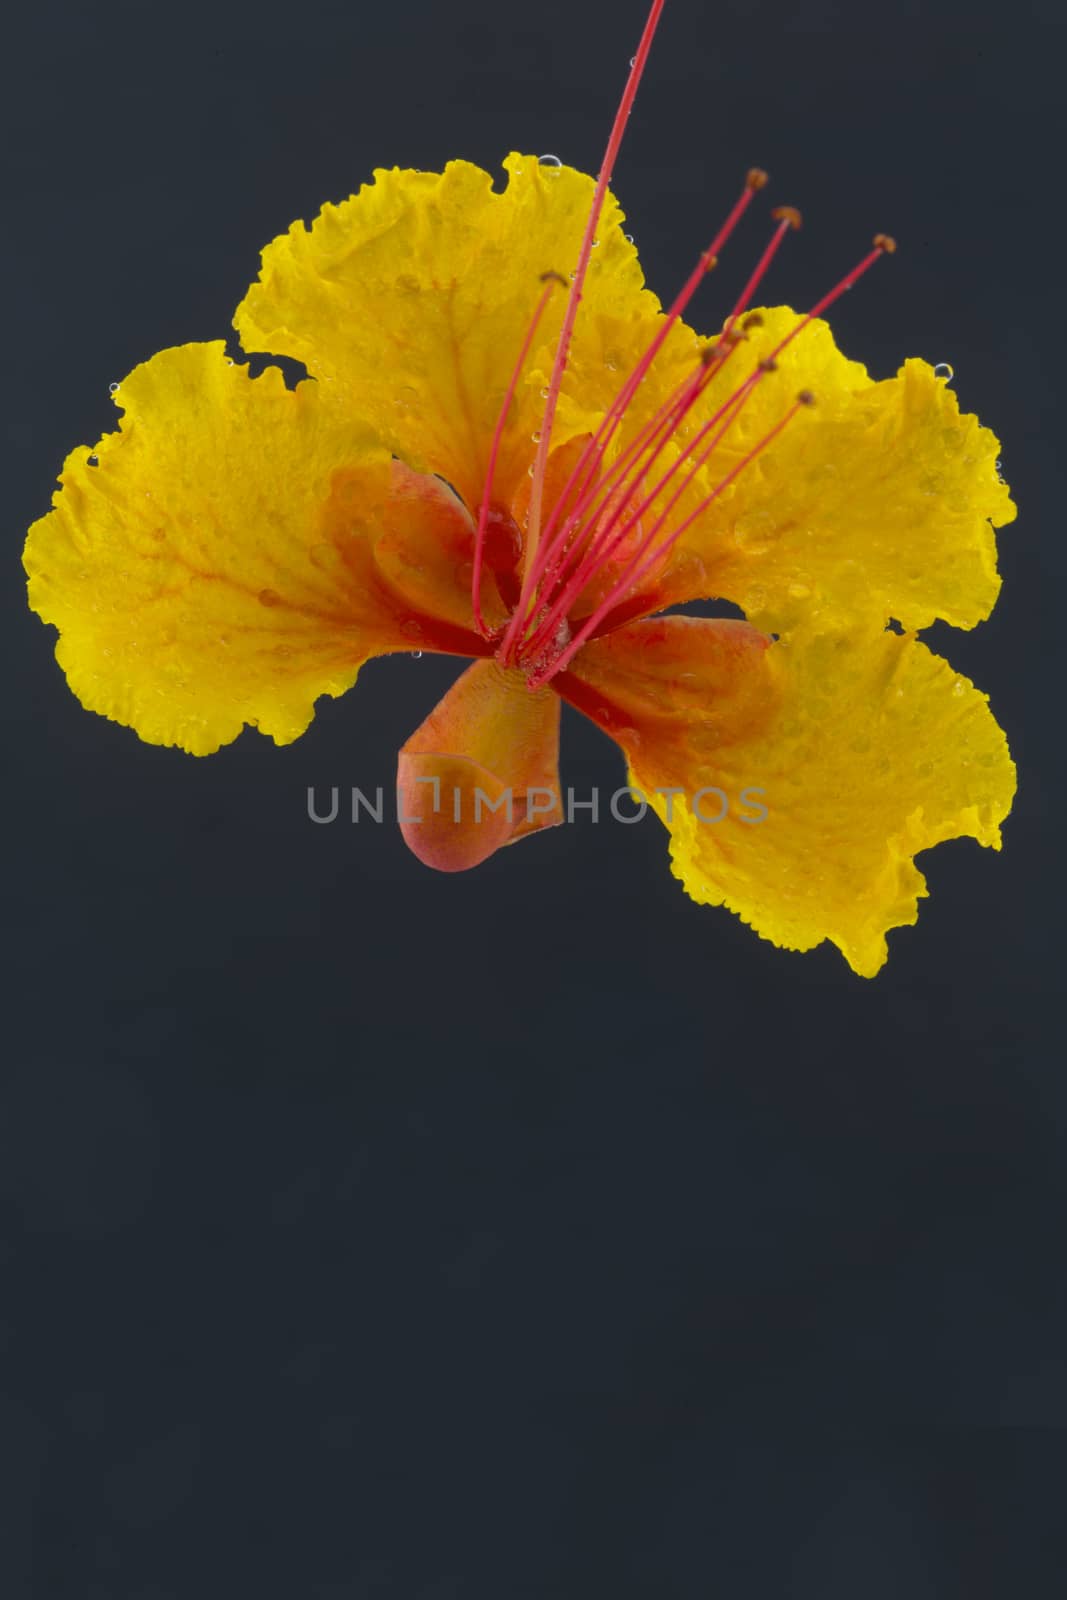 Red bird of paradise blossom is isolated with black copy space below.  Details are visible in botanical photograph.